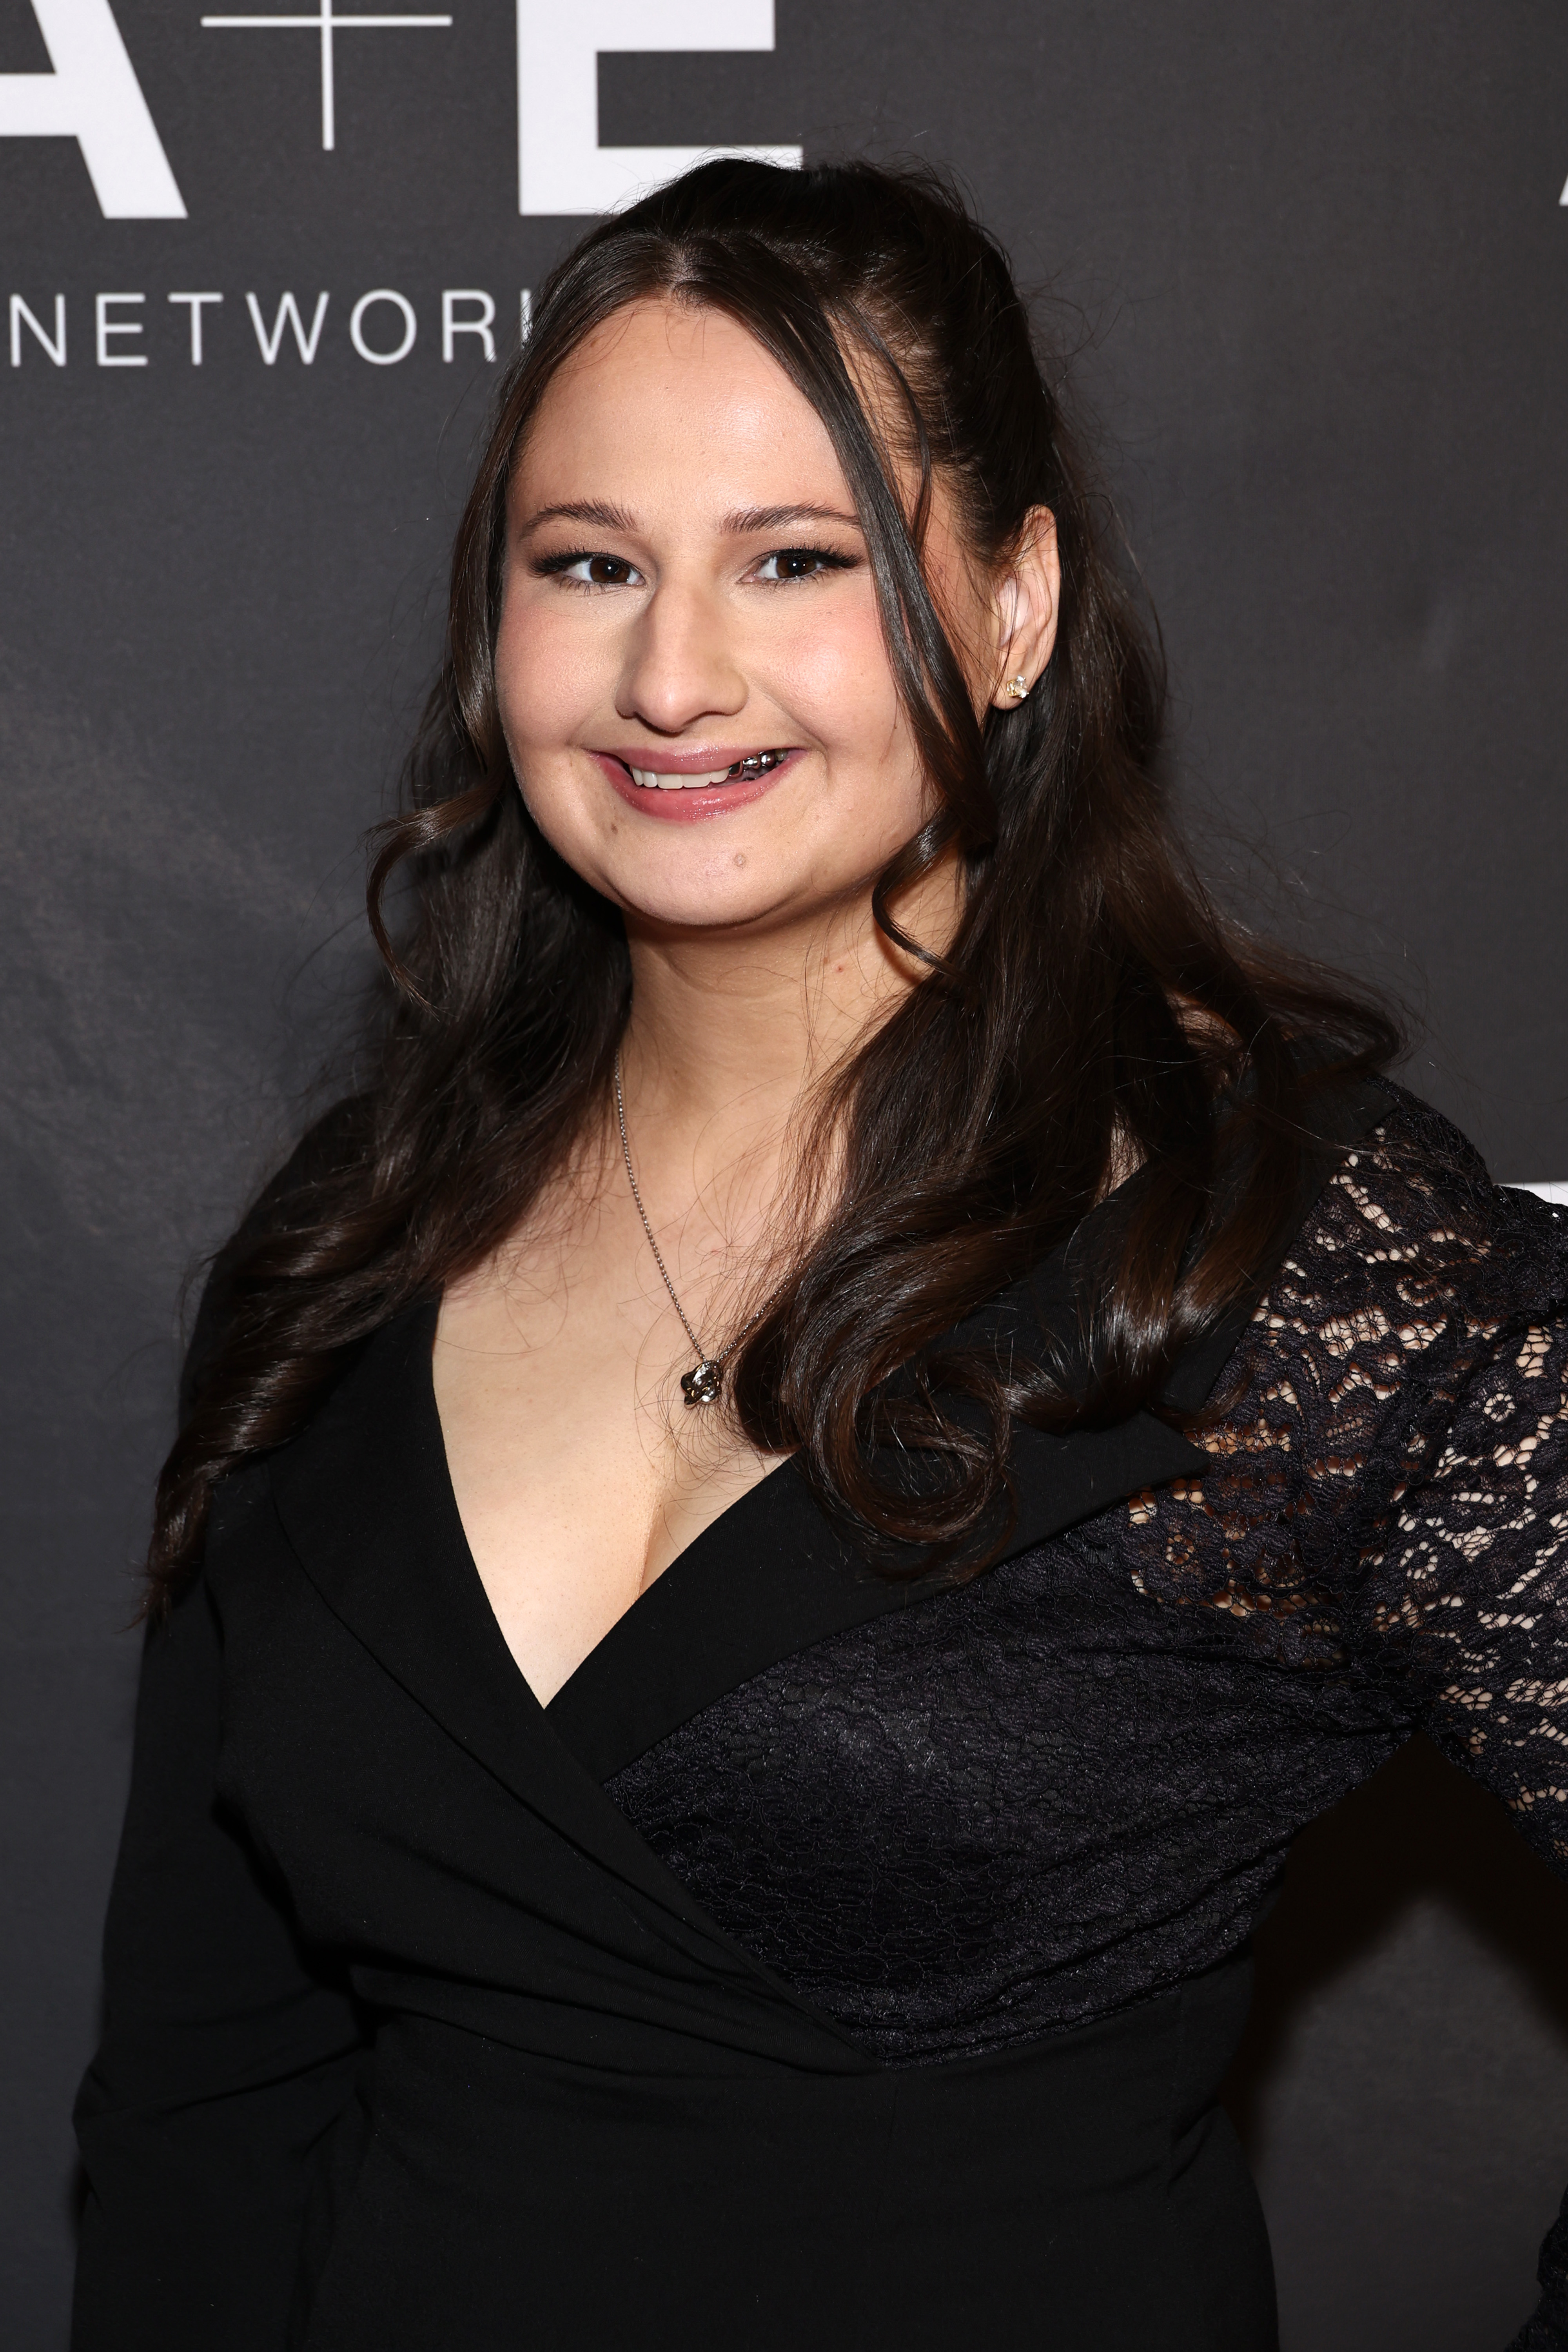 Gypsy Rose Blanchard at the "The Prison Confessions Of Gypsy Rose Blanchard" Red Carpet Event in New York City on January 5, 2024 | Source: Getty Images